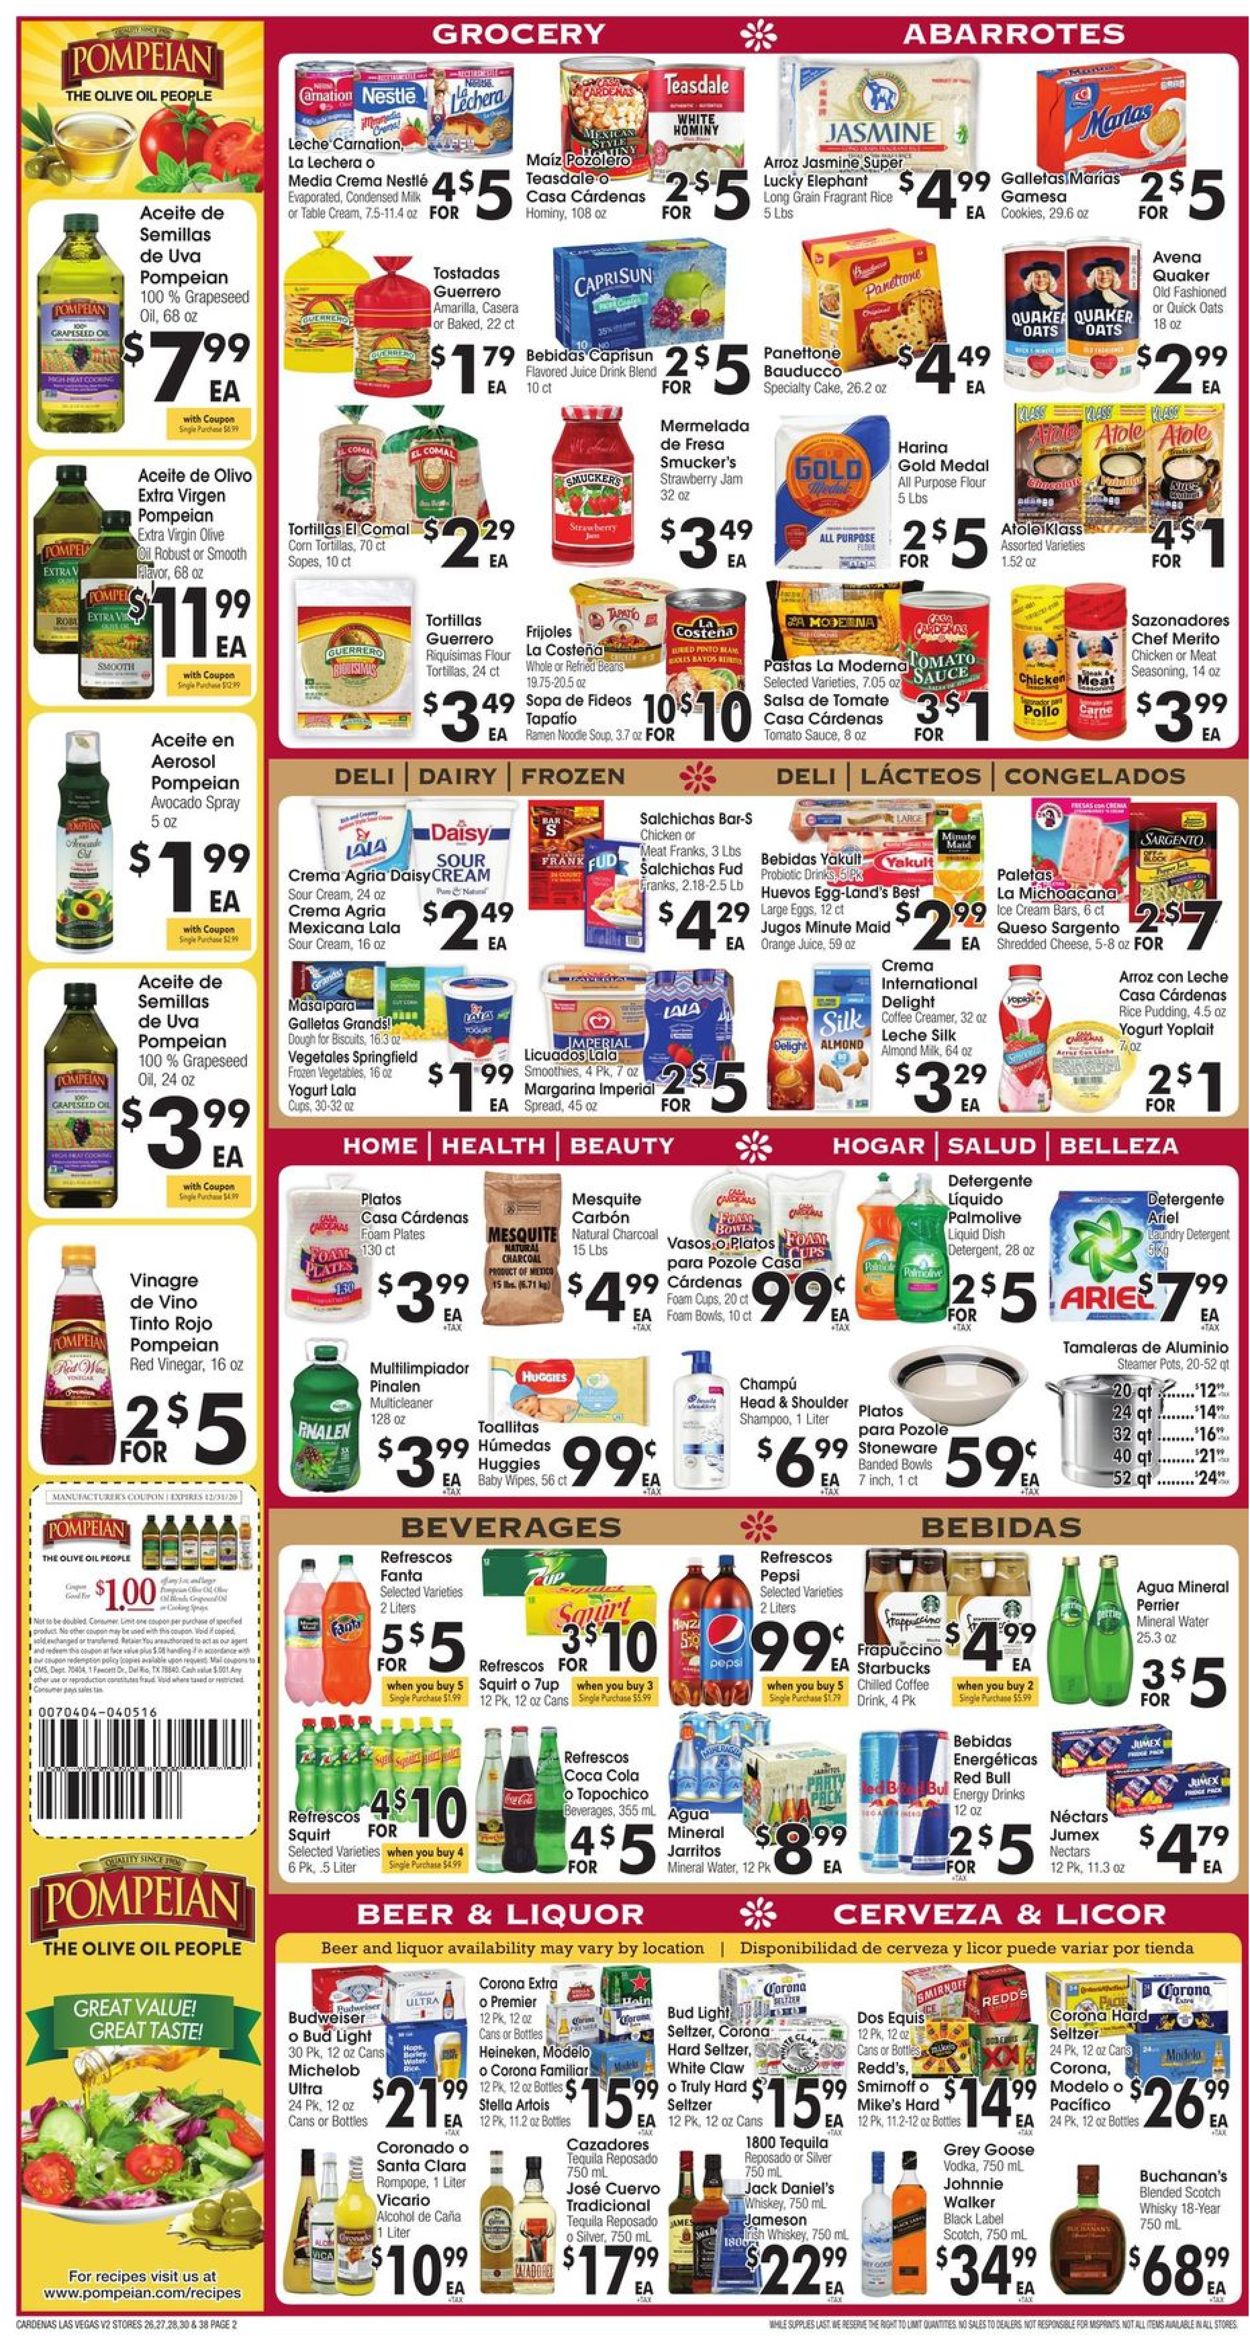 Cardenas Current weekly ad 12/09 - 12/15/2020 [2] - frequent-ads.com